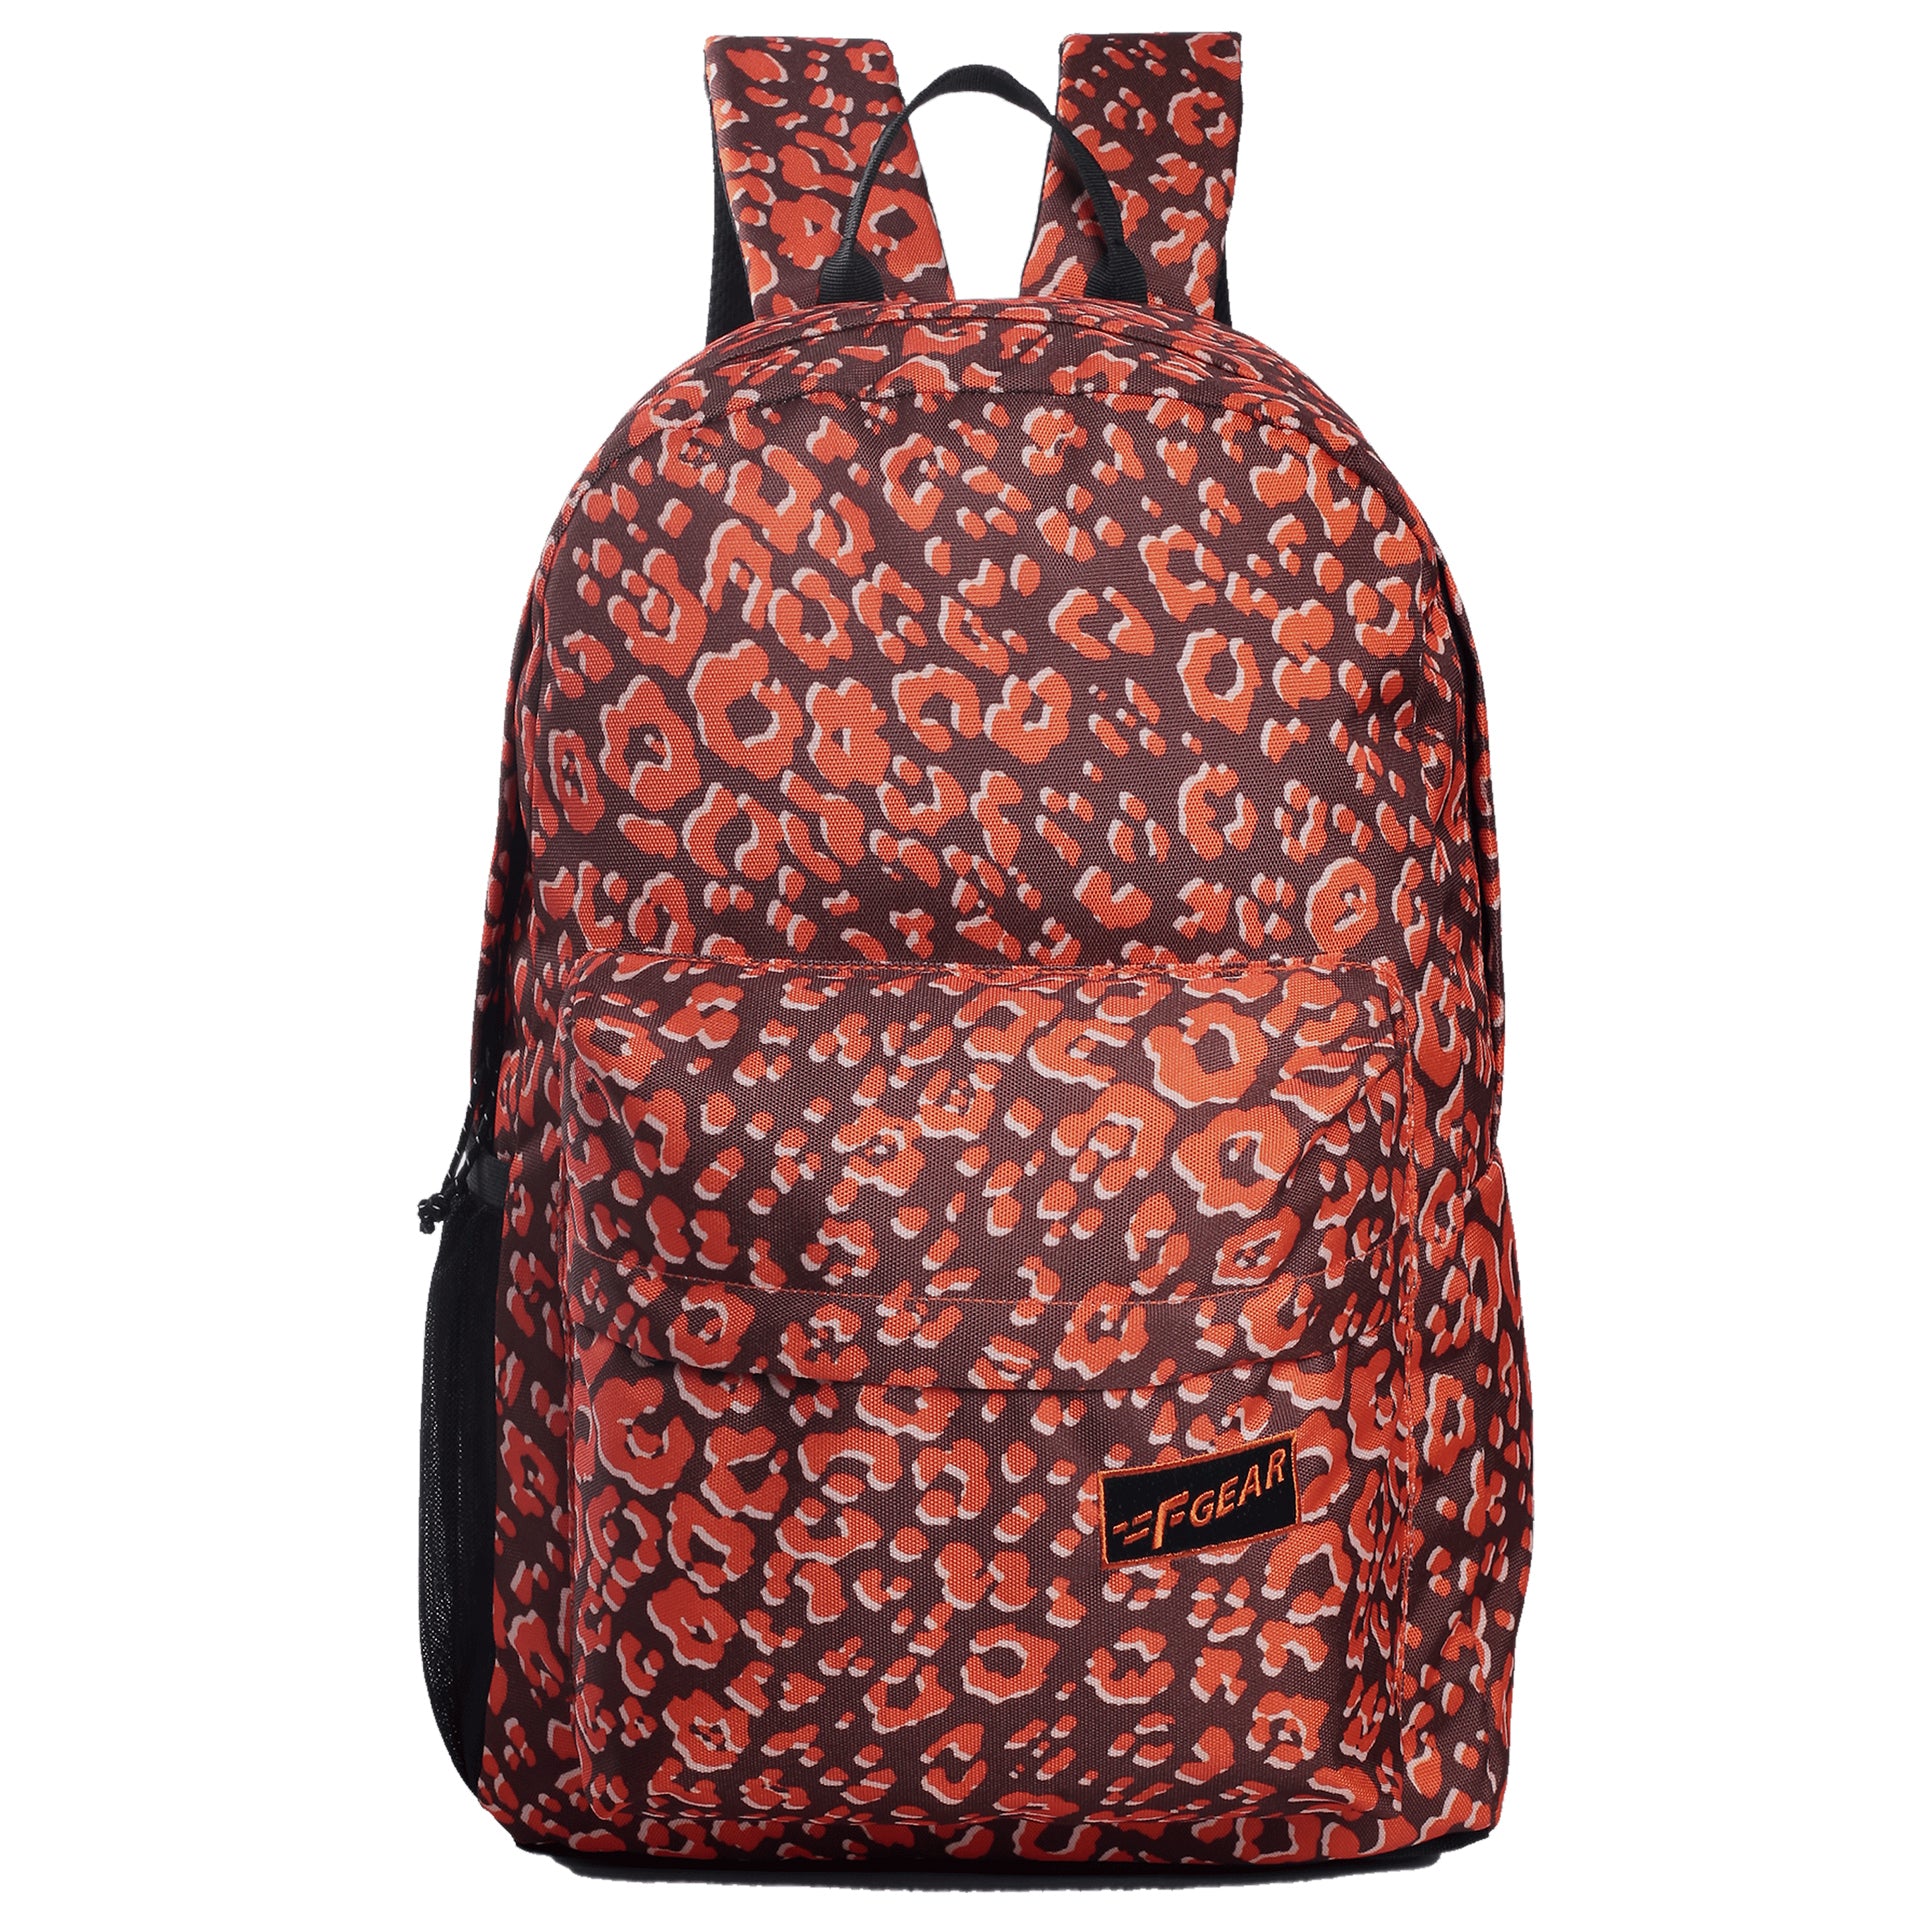 Bolso - Leopard Print Backpack | YesStyle